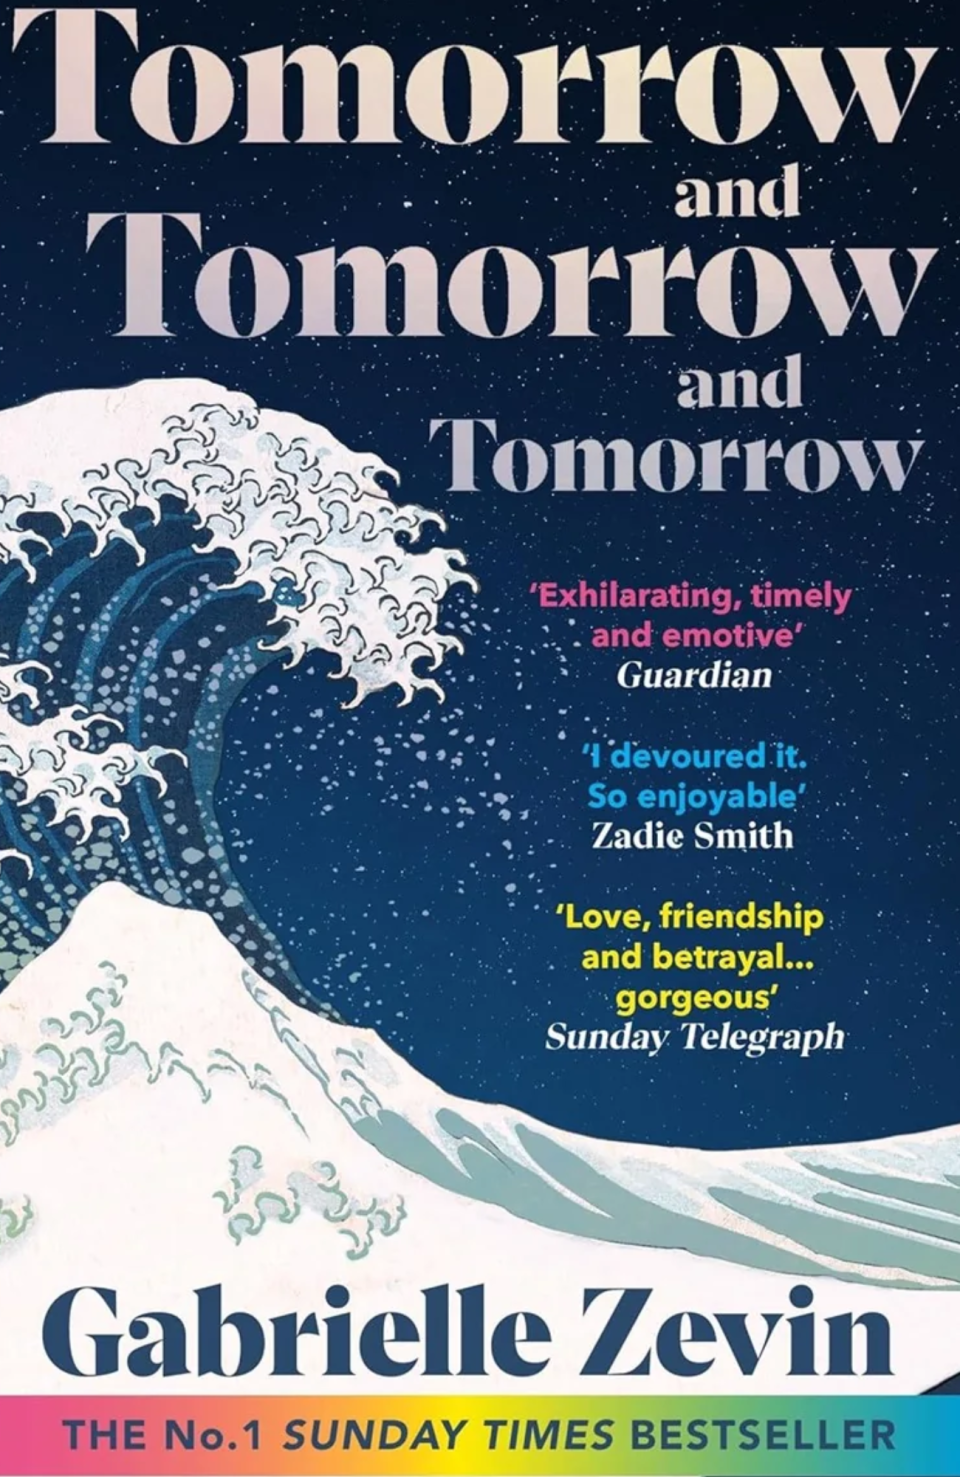 Book cover of Tomorrow and Tomorrow and Tomorrow by Gabrielle Zevin featuring a graphic of a tsunami wave